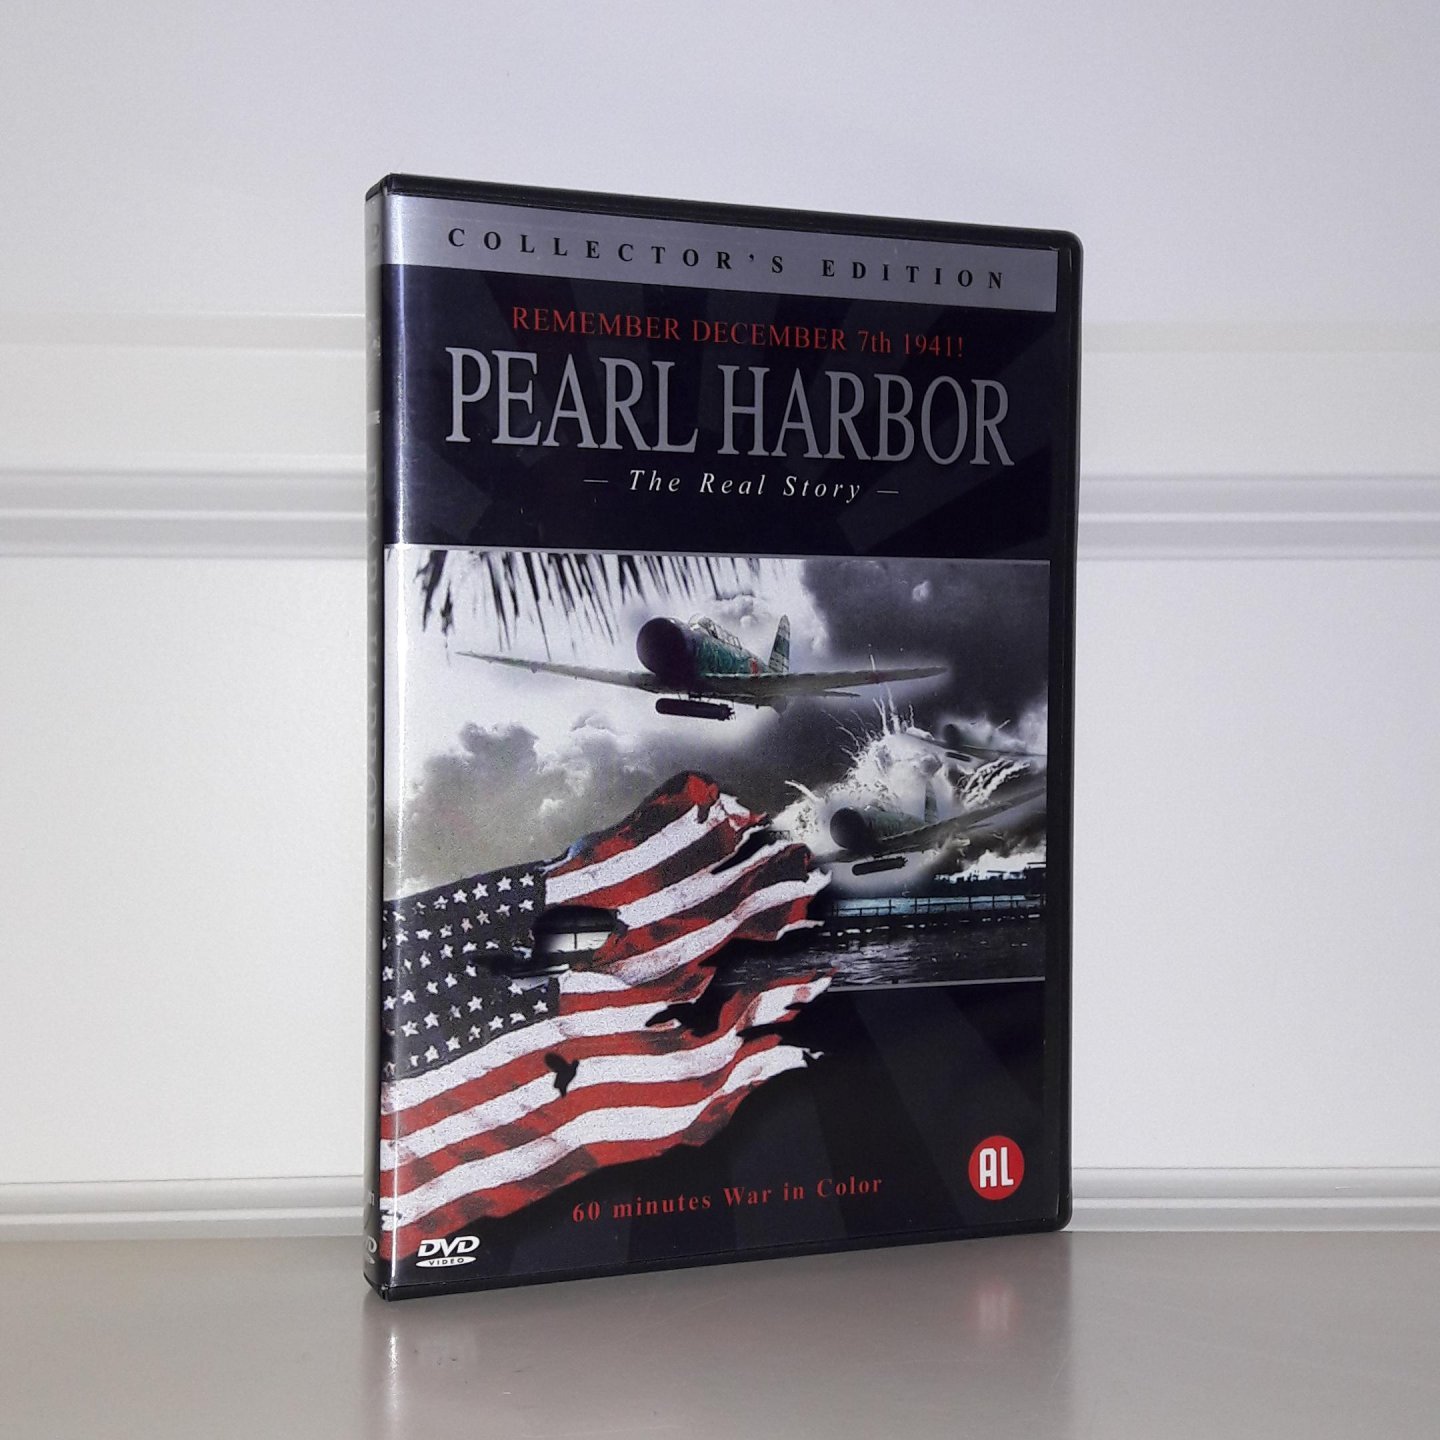  - Pearl Harbor. The real story. 60 minutes of war in color. Collector's edition